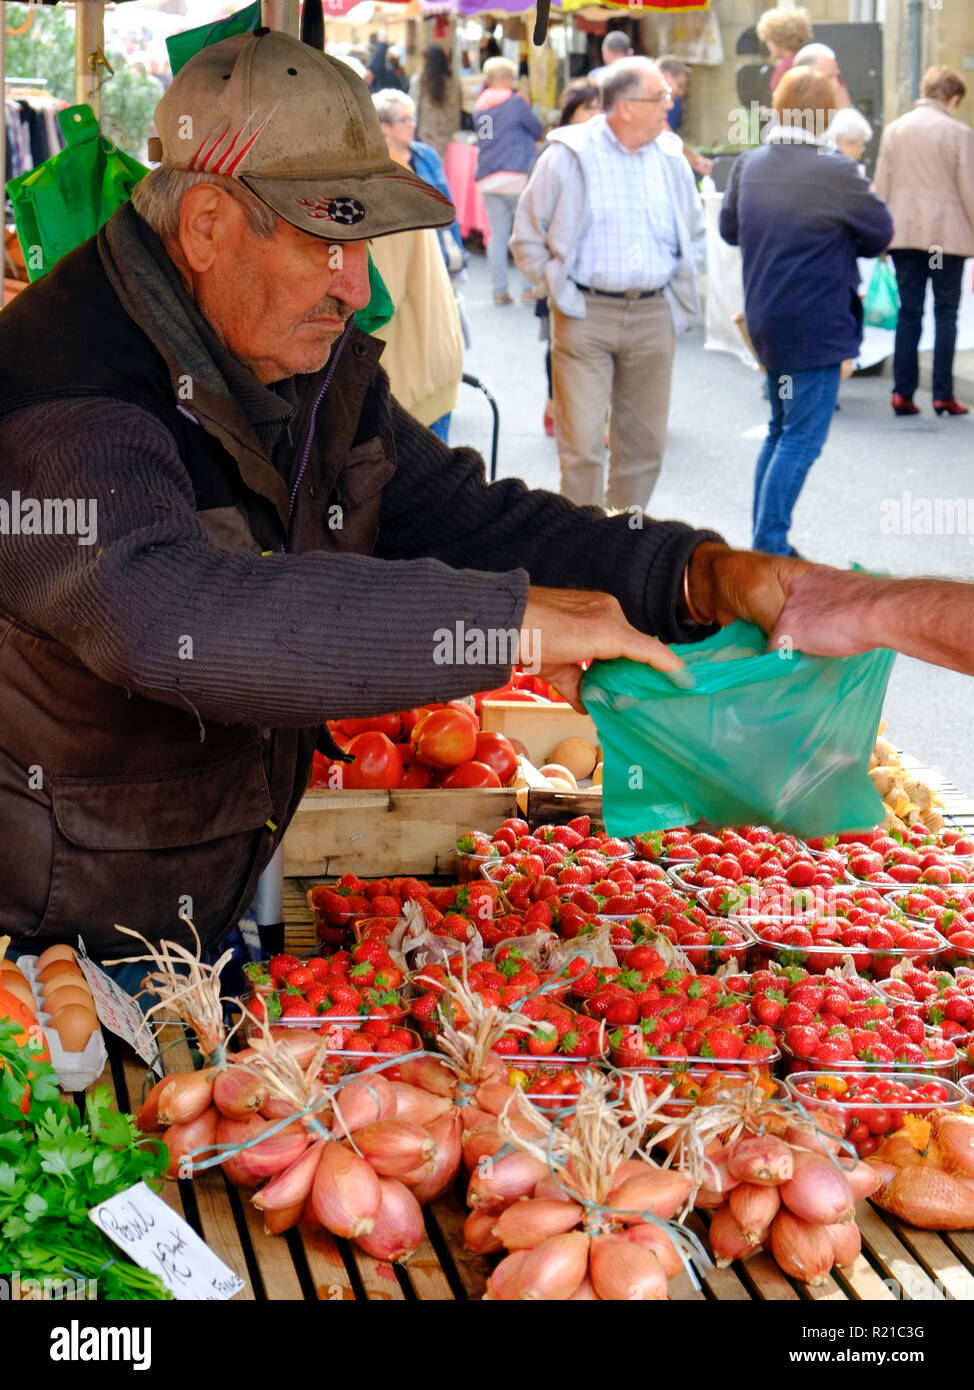 St-Cyprien, Dordogne, France - 24th September 2015: A characterful fruit stallholder hands over a purchase at the Sunday street market in St-Cyprien, Dordogne, France Stock Photo